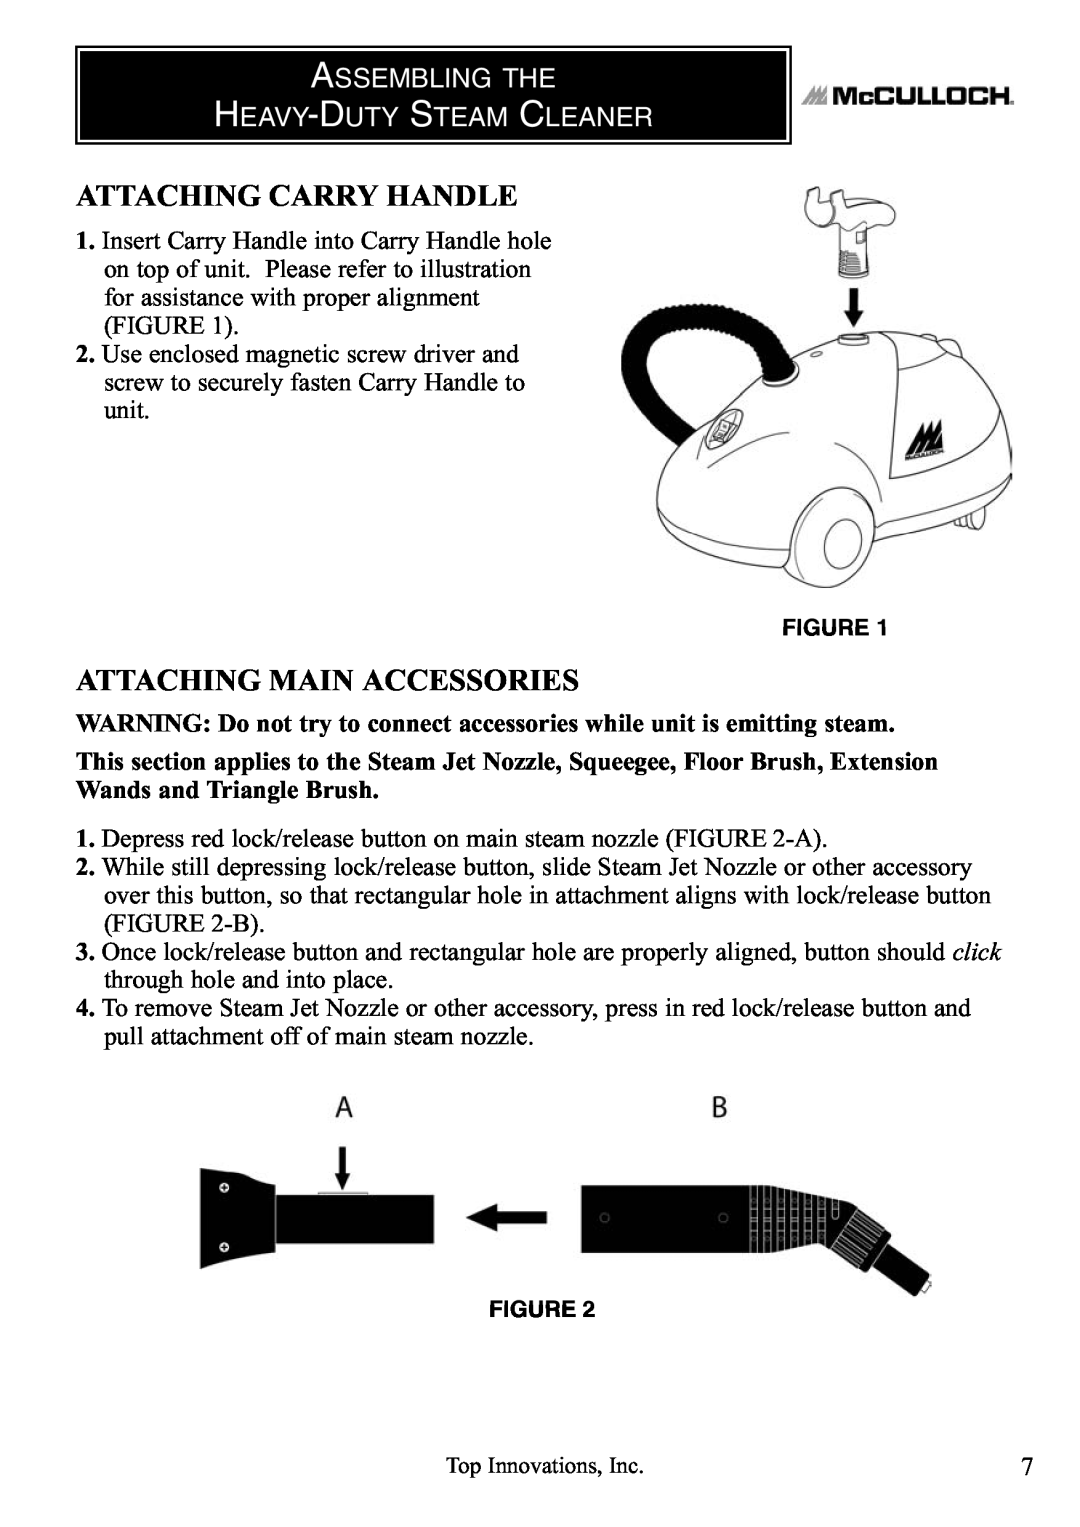 McCulloch MC1275 warranty Attaching Carry Handle, Attaching Main Accessories, Assembling The Heavy-Duty Steam Cleaner 